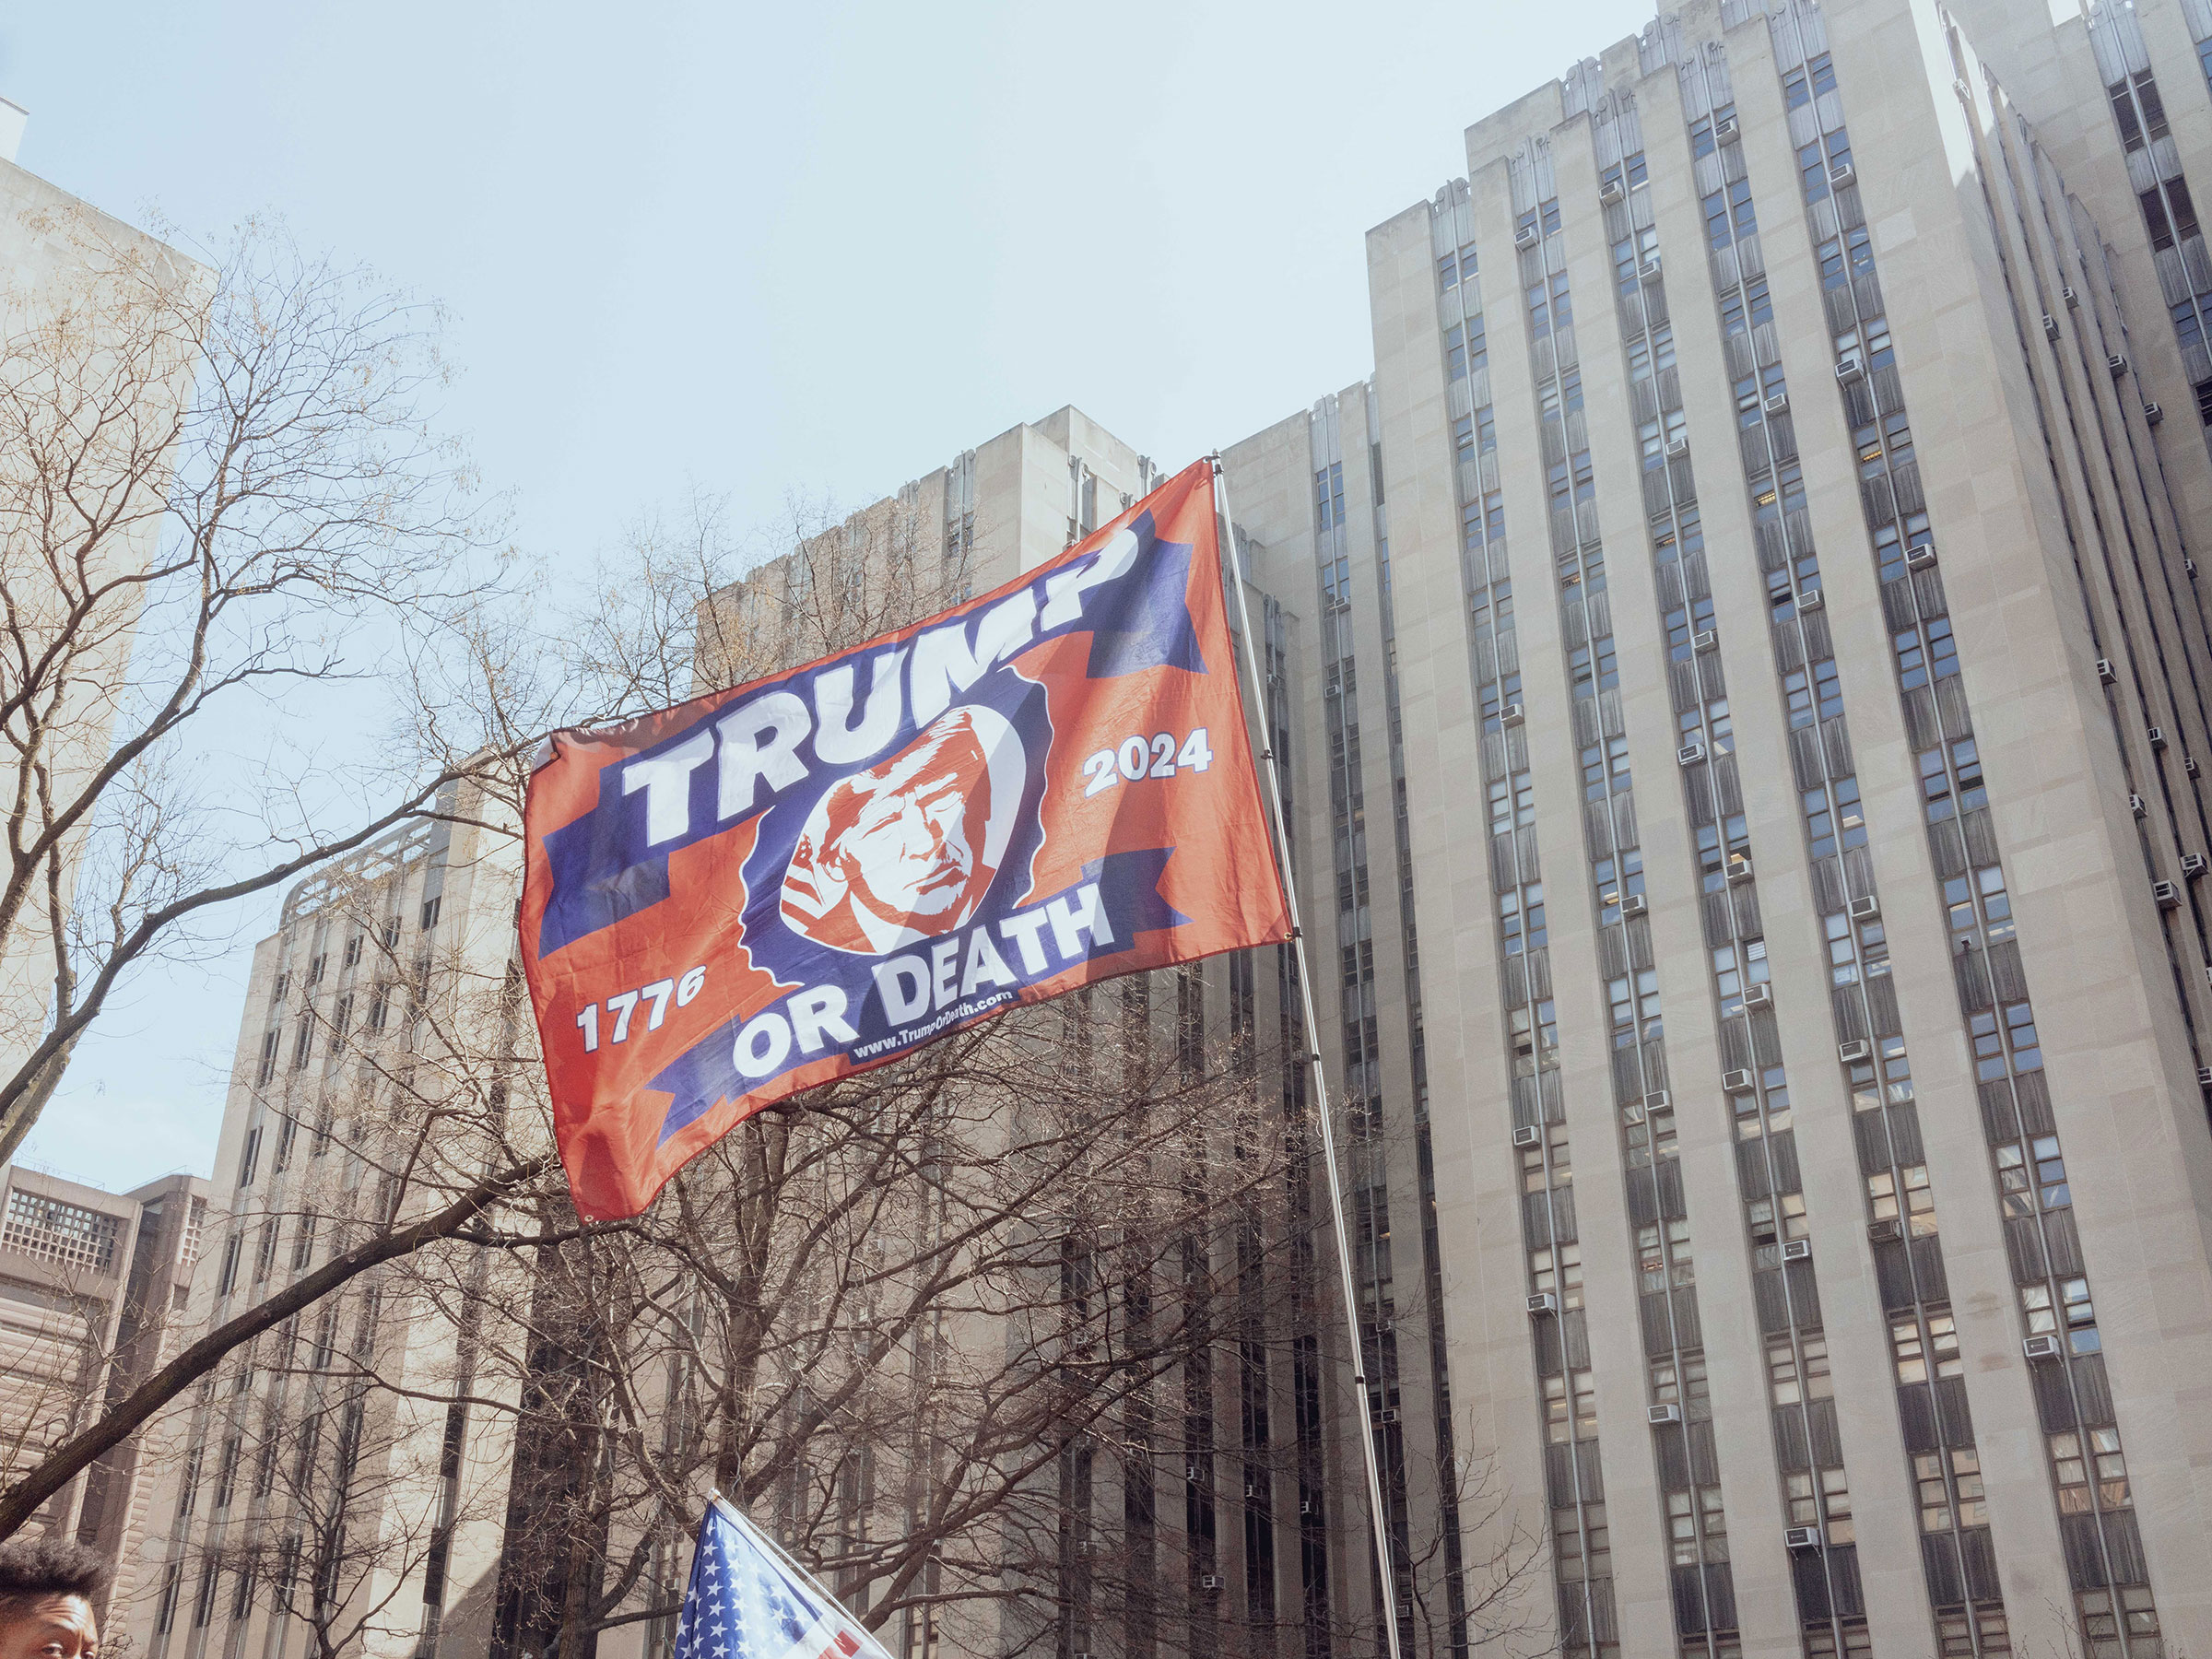 A supporter of former President Donald Trump waves a flag during a rally outside criminal court in New York City on April 4, 2023. (Ismail Ferdous—Bloomberg/Getty Images)